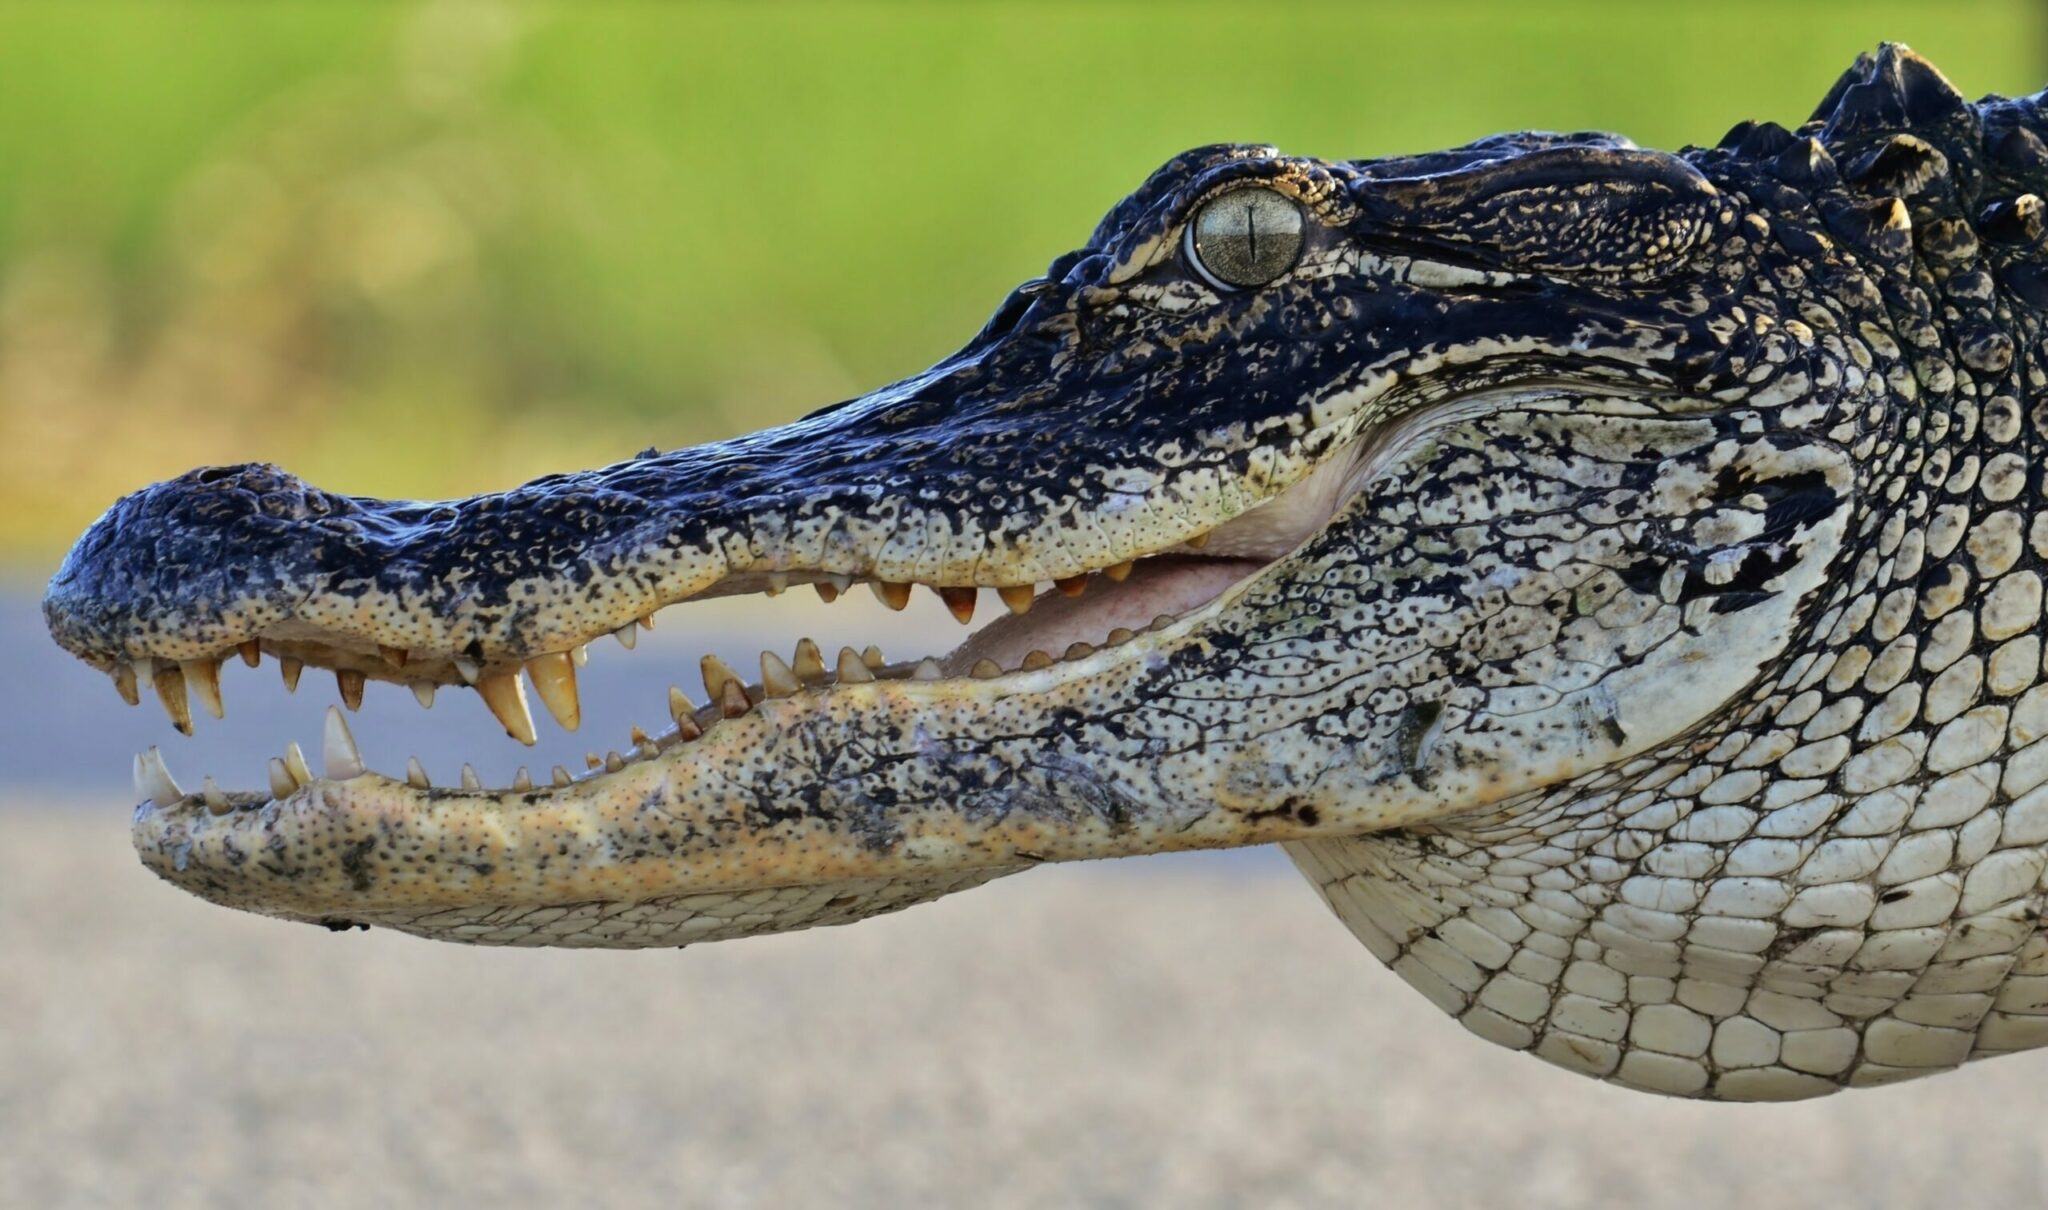 which parent determines the sex of alligator babies when the eggs are laid scaled